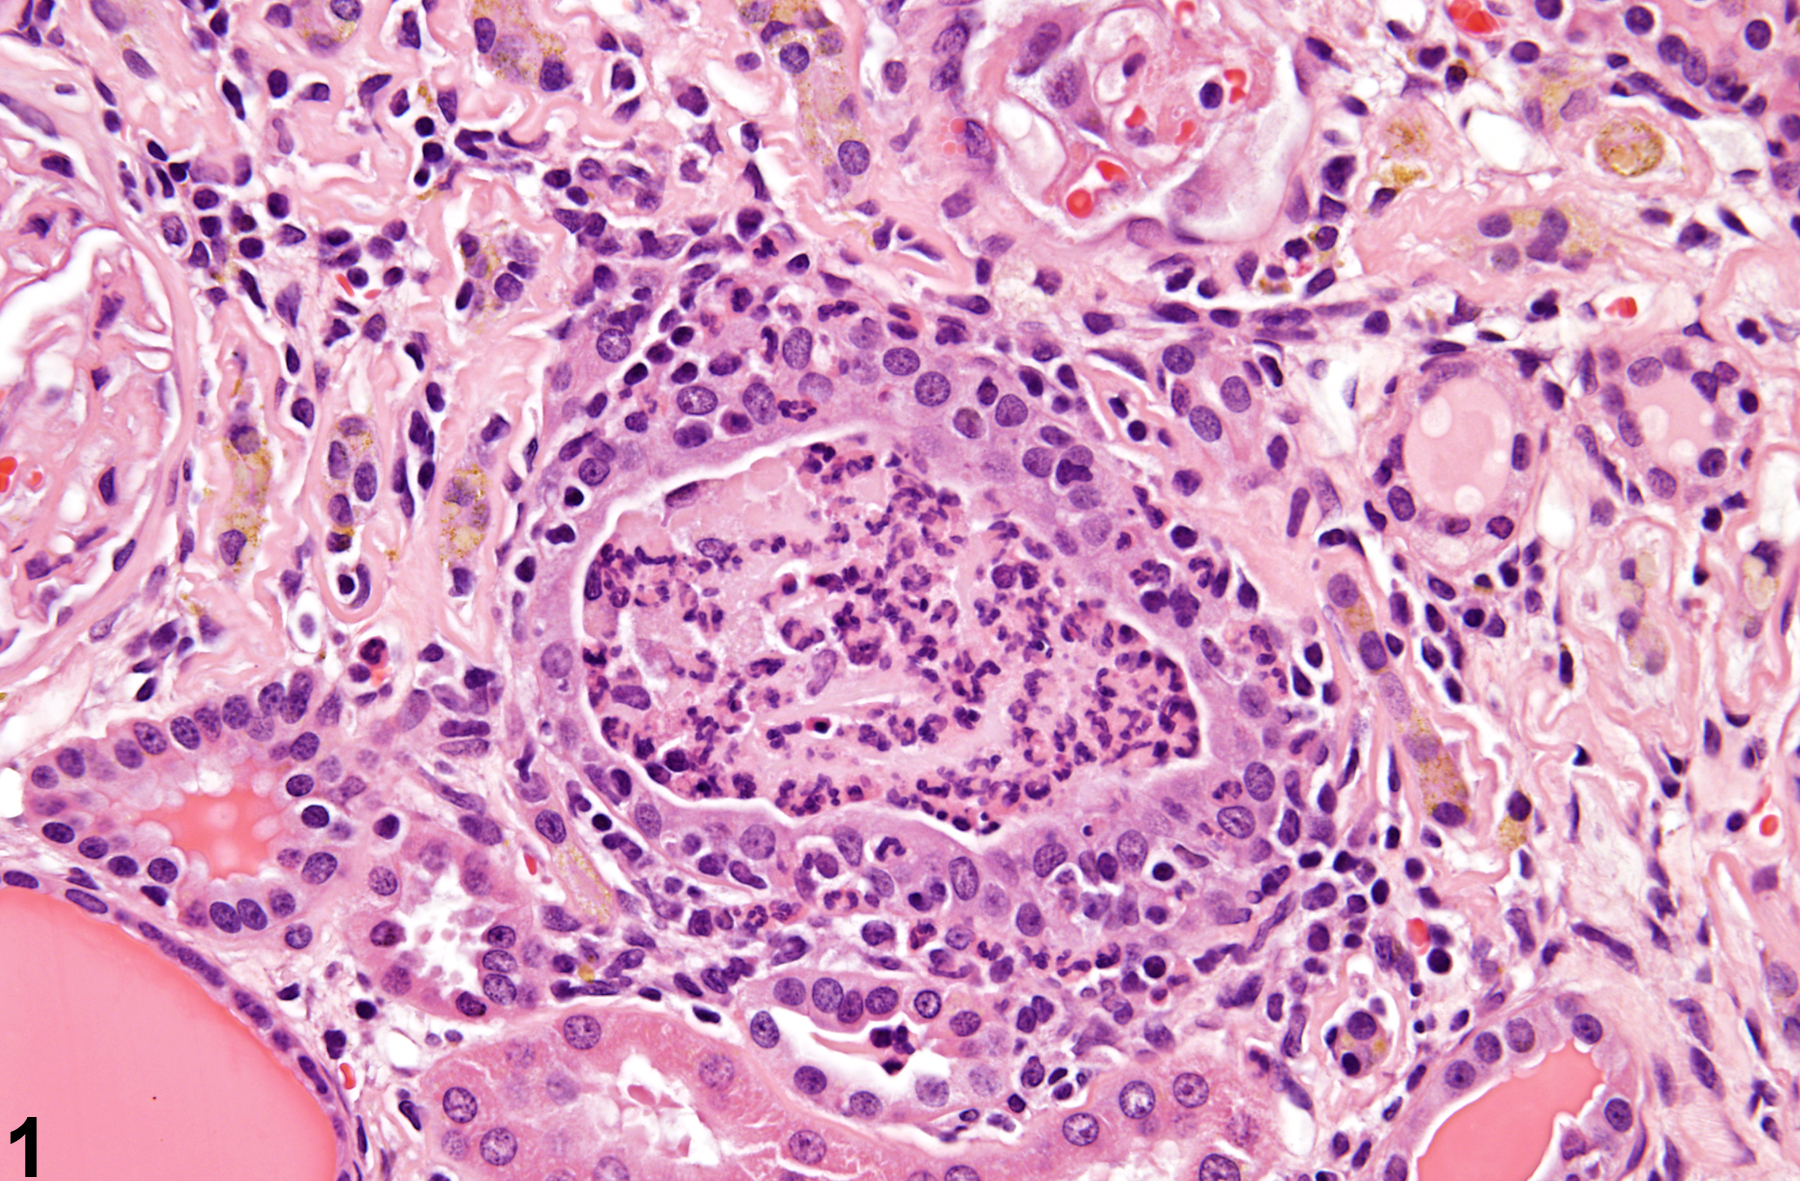 Image of inflammation, acute in the kidney from a male F344/N rat in a chronic study